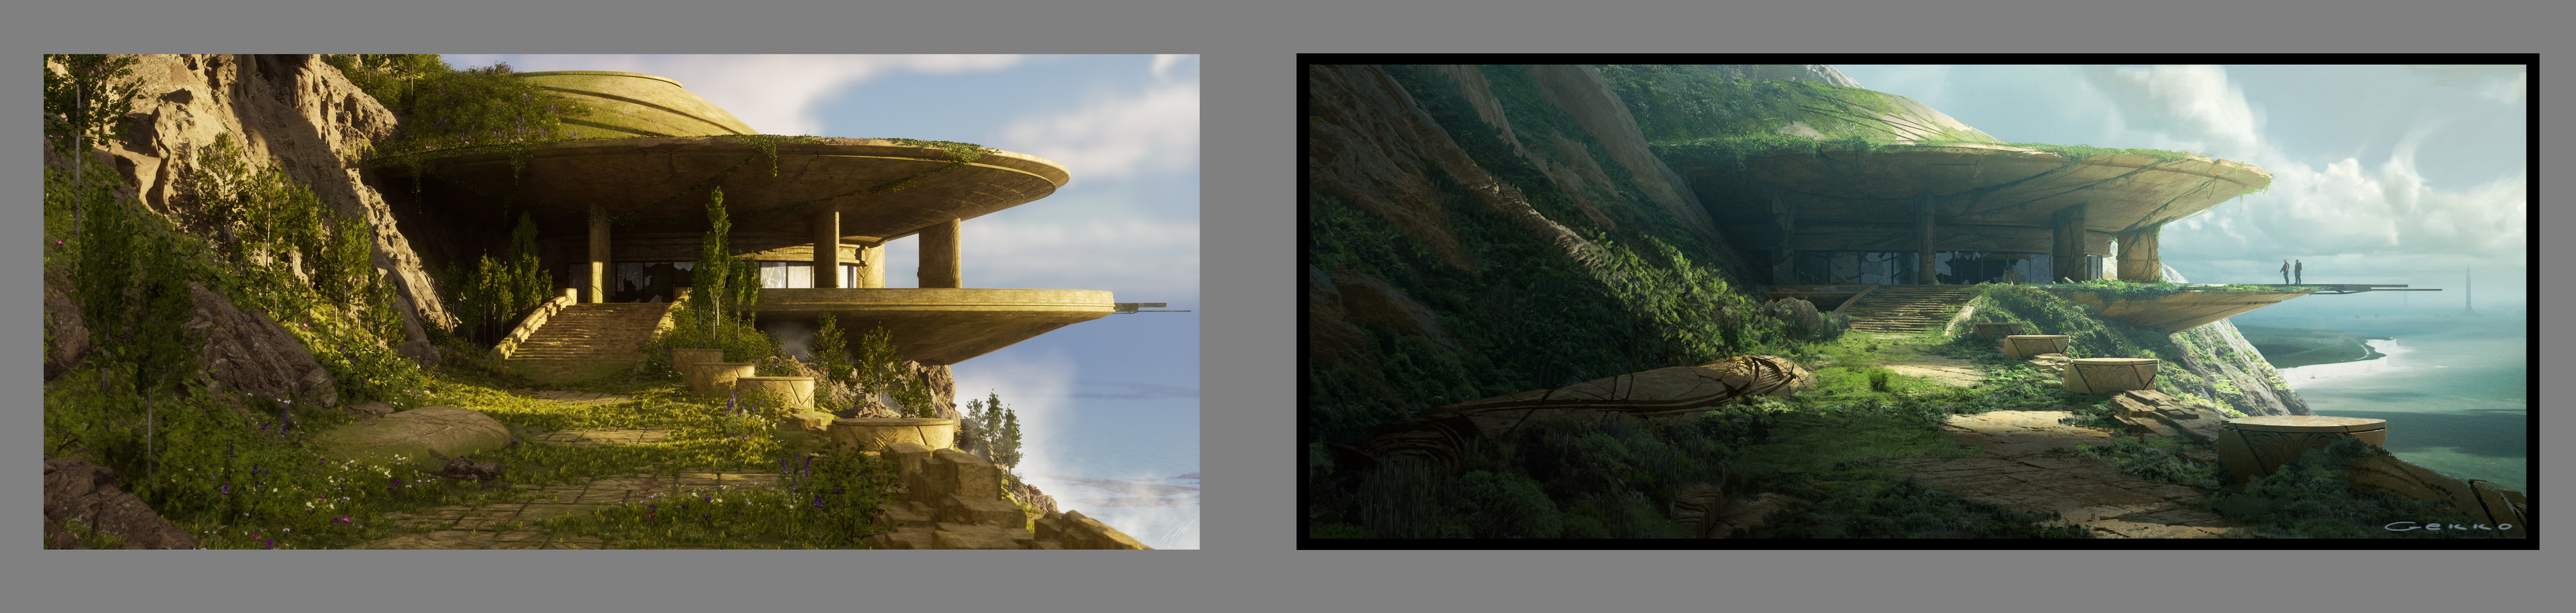 Main shot compared to concept